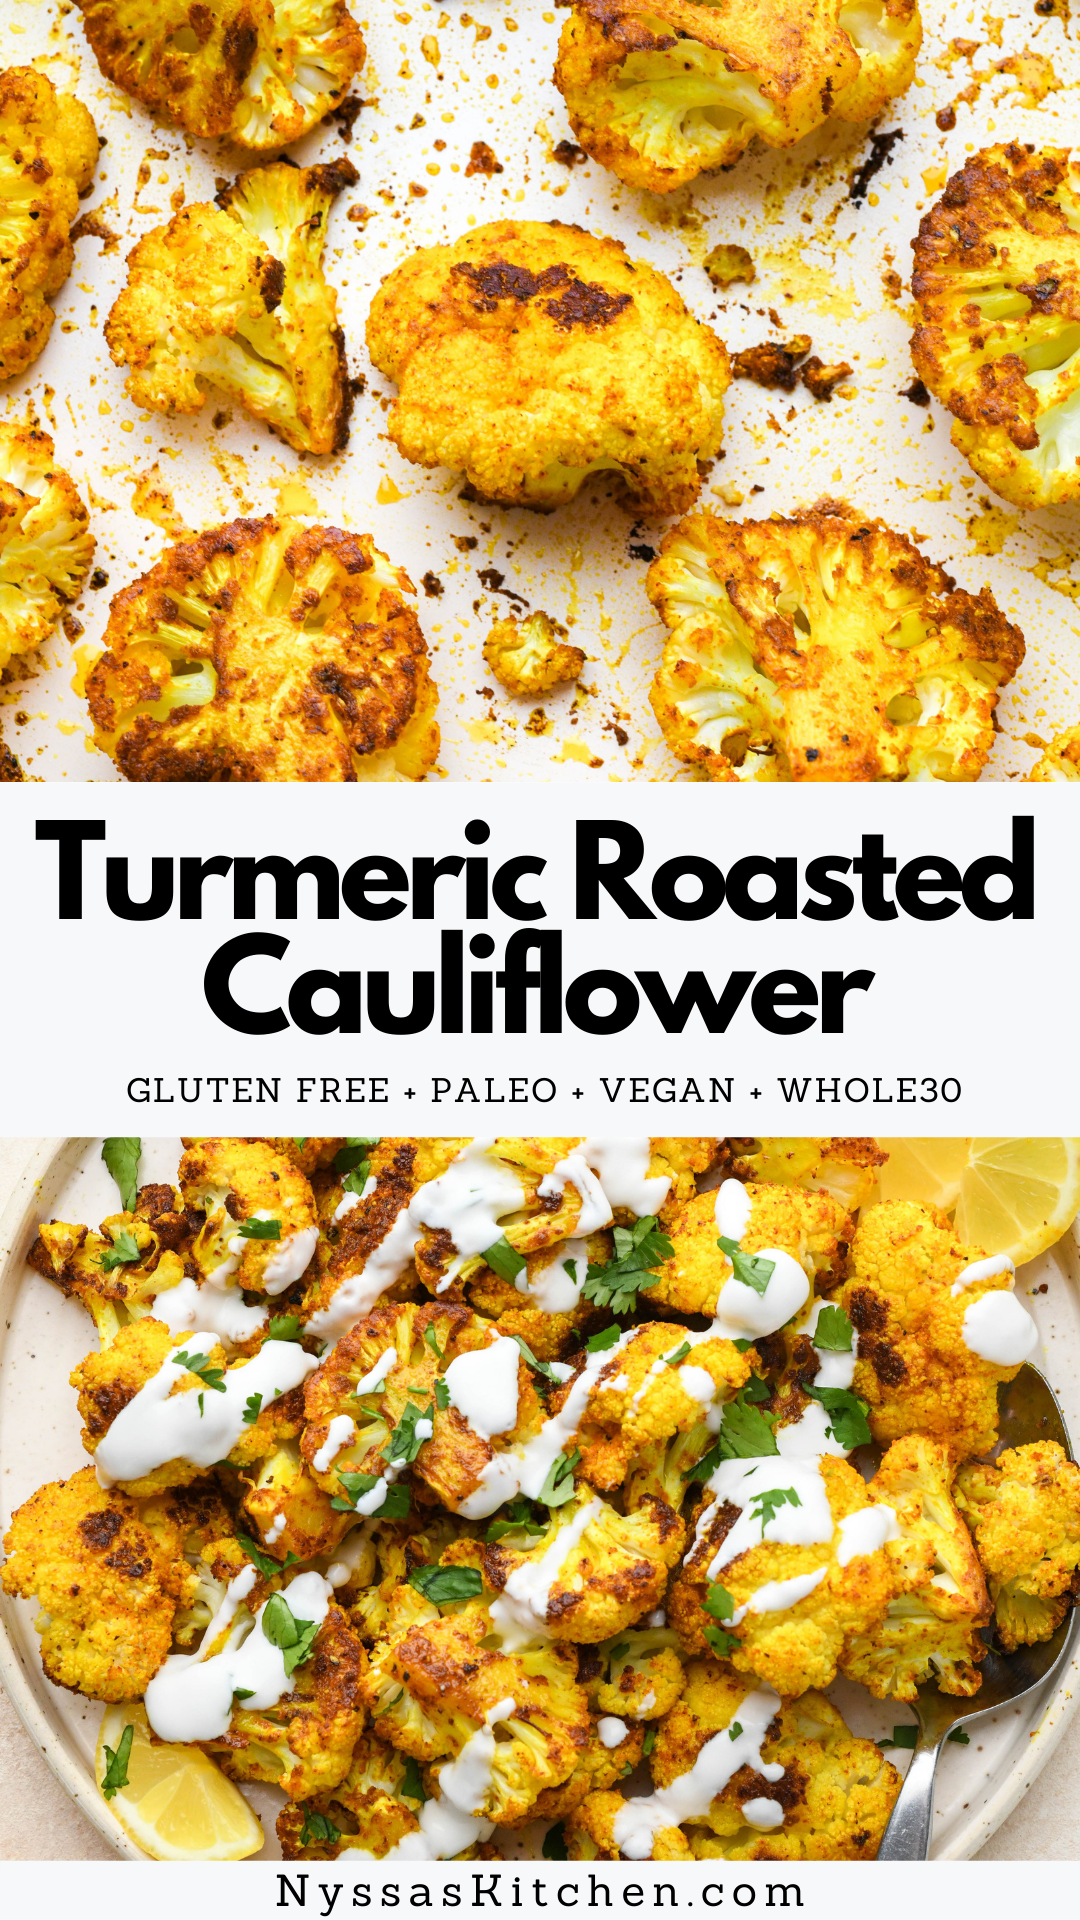 Turmeric roasted cauliflower is a vibrant, healthy veggie recipe that is bursting with flavor! Made with cauliflower florets and a simple spice blend, it's the perfect easy side for any meal. Easy to make and so delicious. Gluten free, vegan, dairy free, vegetarian, paleo, and Whole30 compatible.